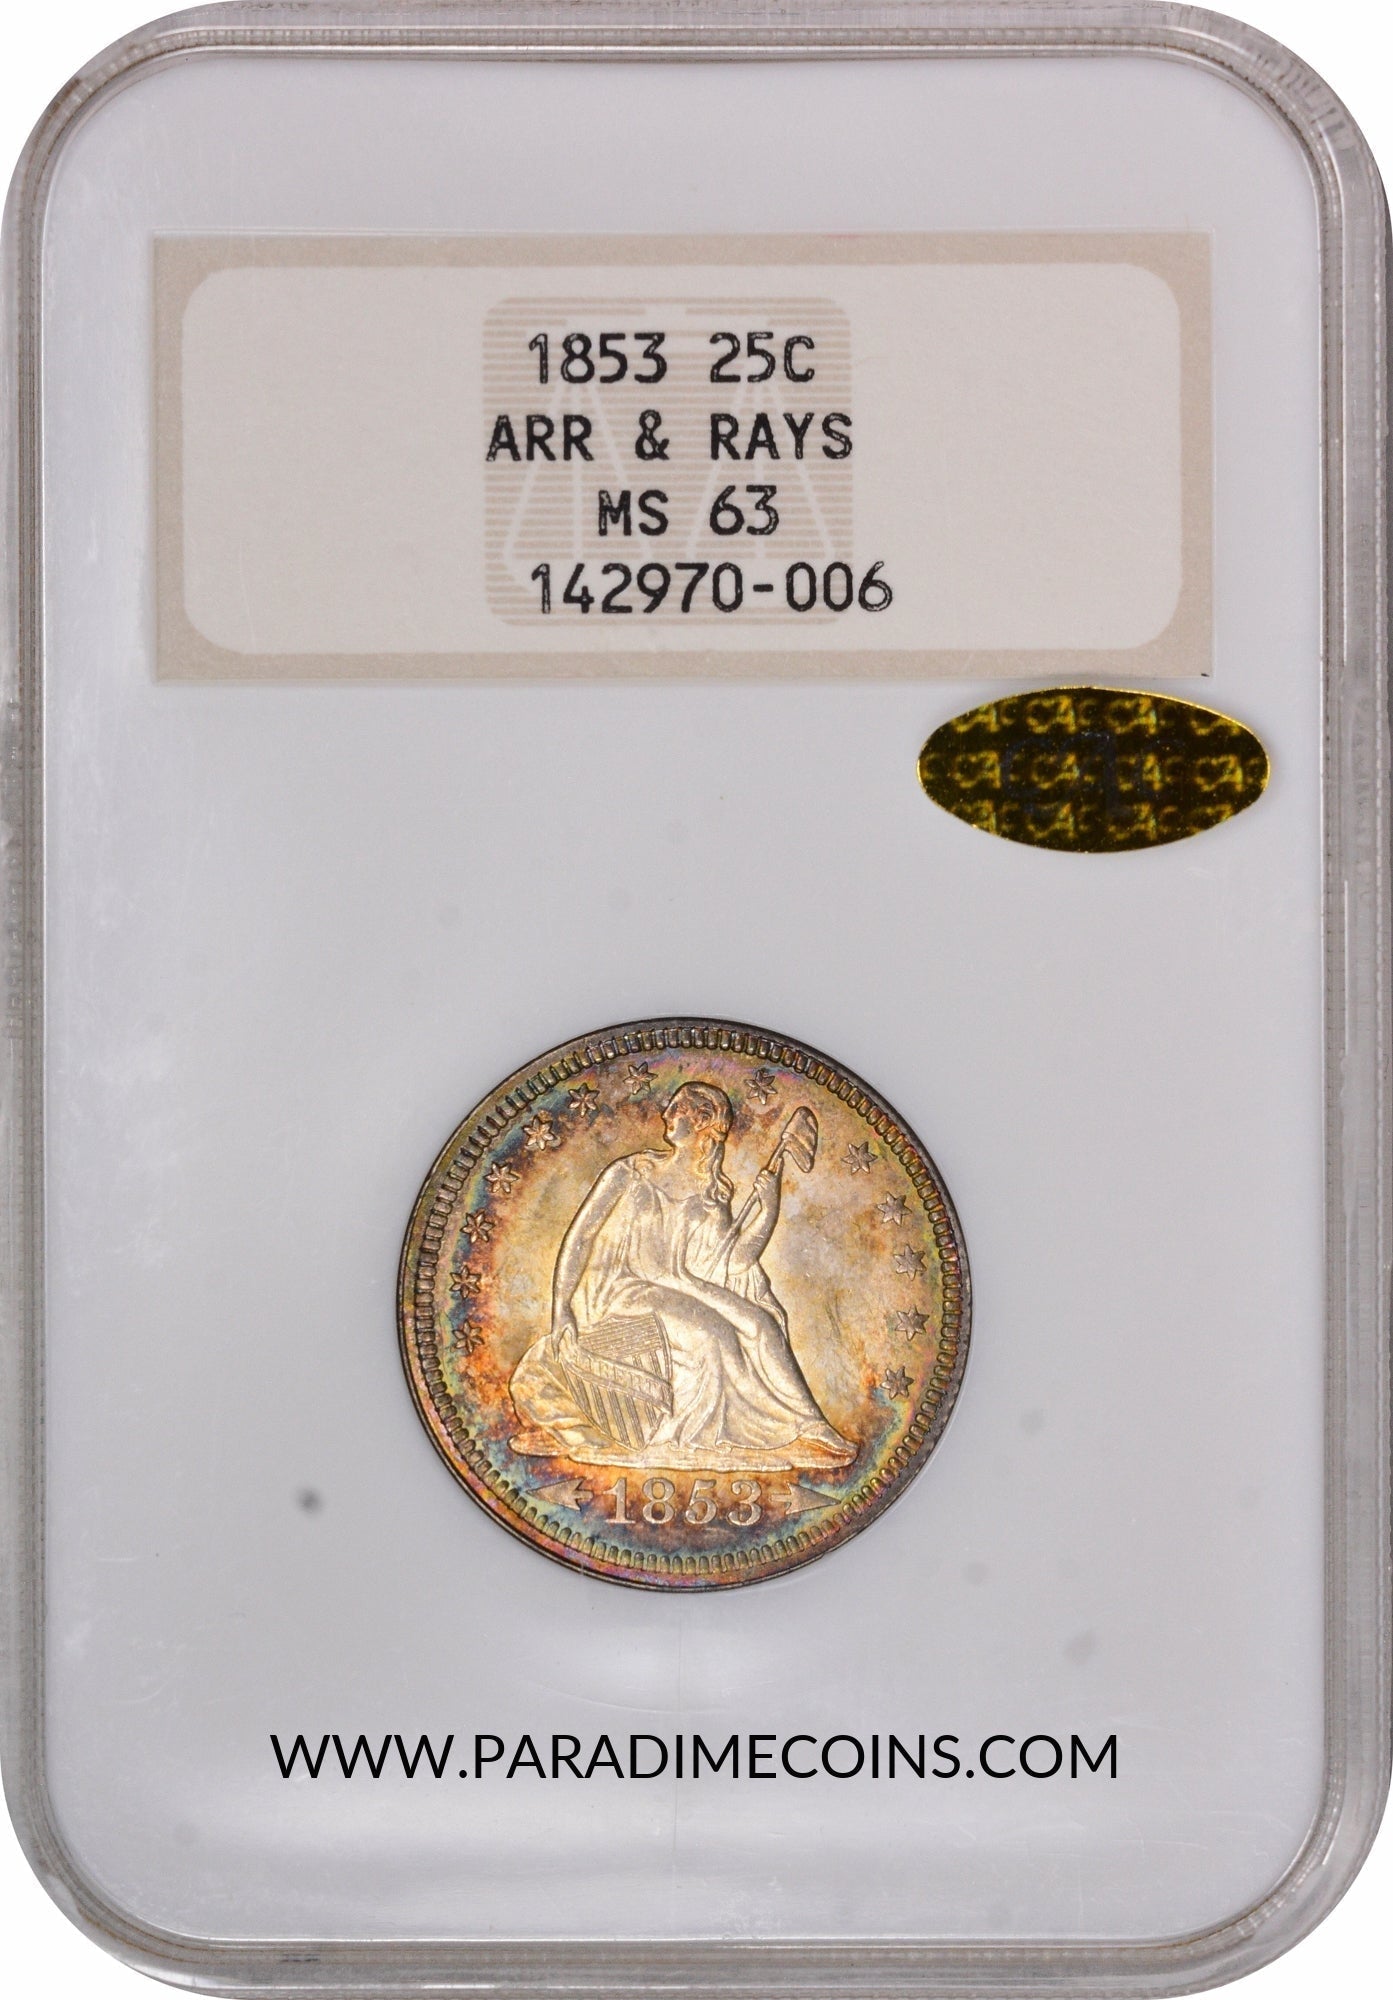 1853 25C ARROWS & RAYS MS63 OH NGC GOLD CAC - Paradime Coins | PCGS NGC CACG CAC Rare US Numismatic Coins For Sale